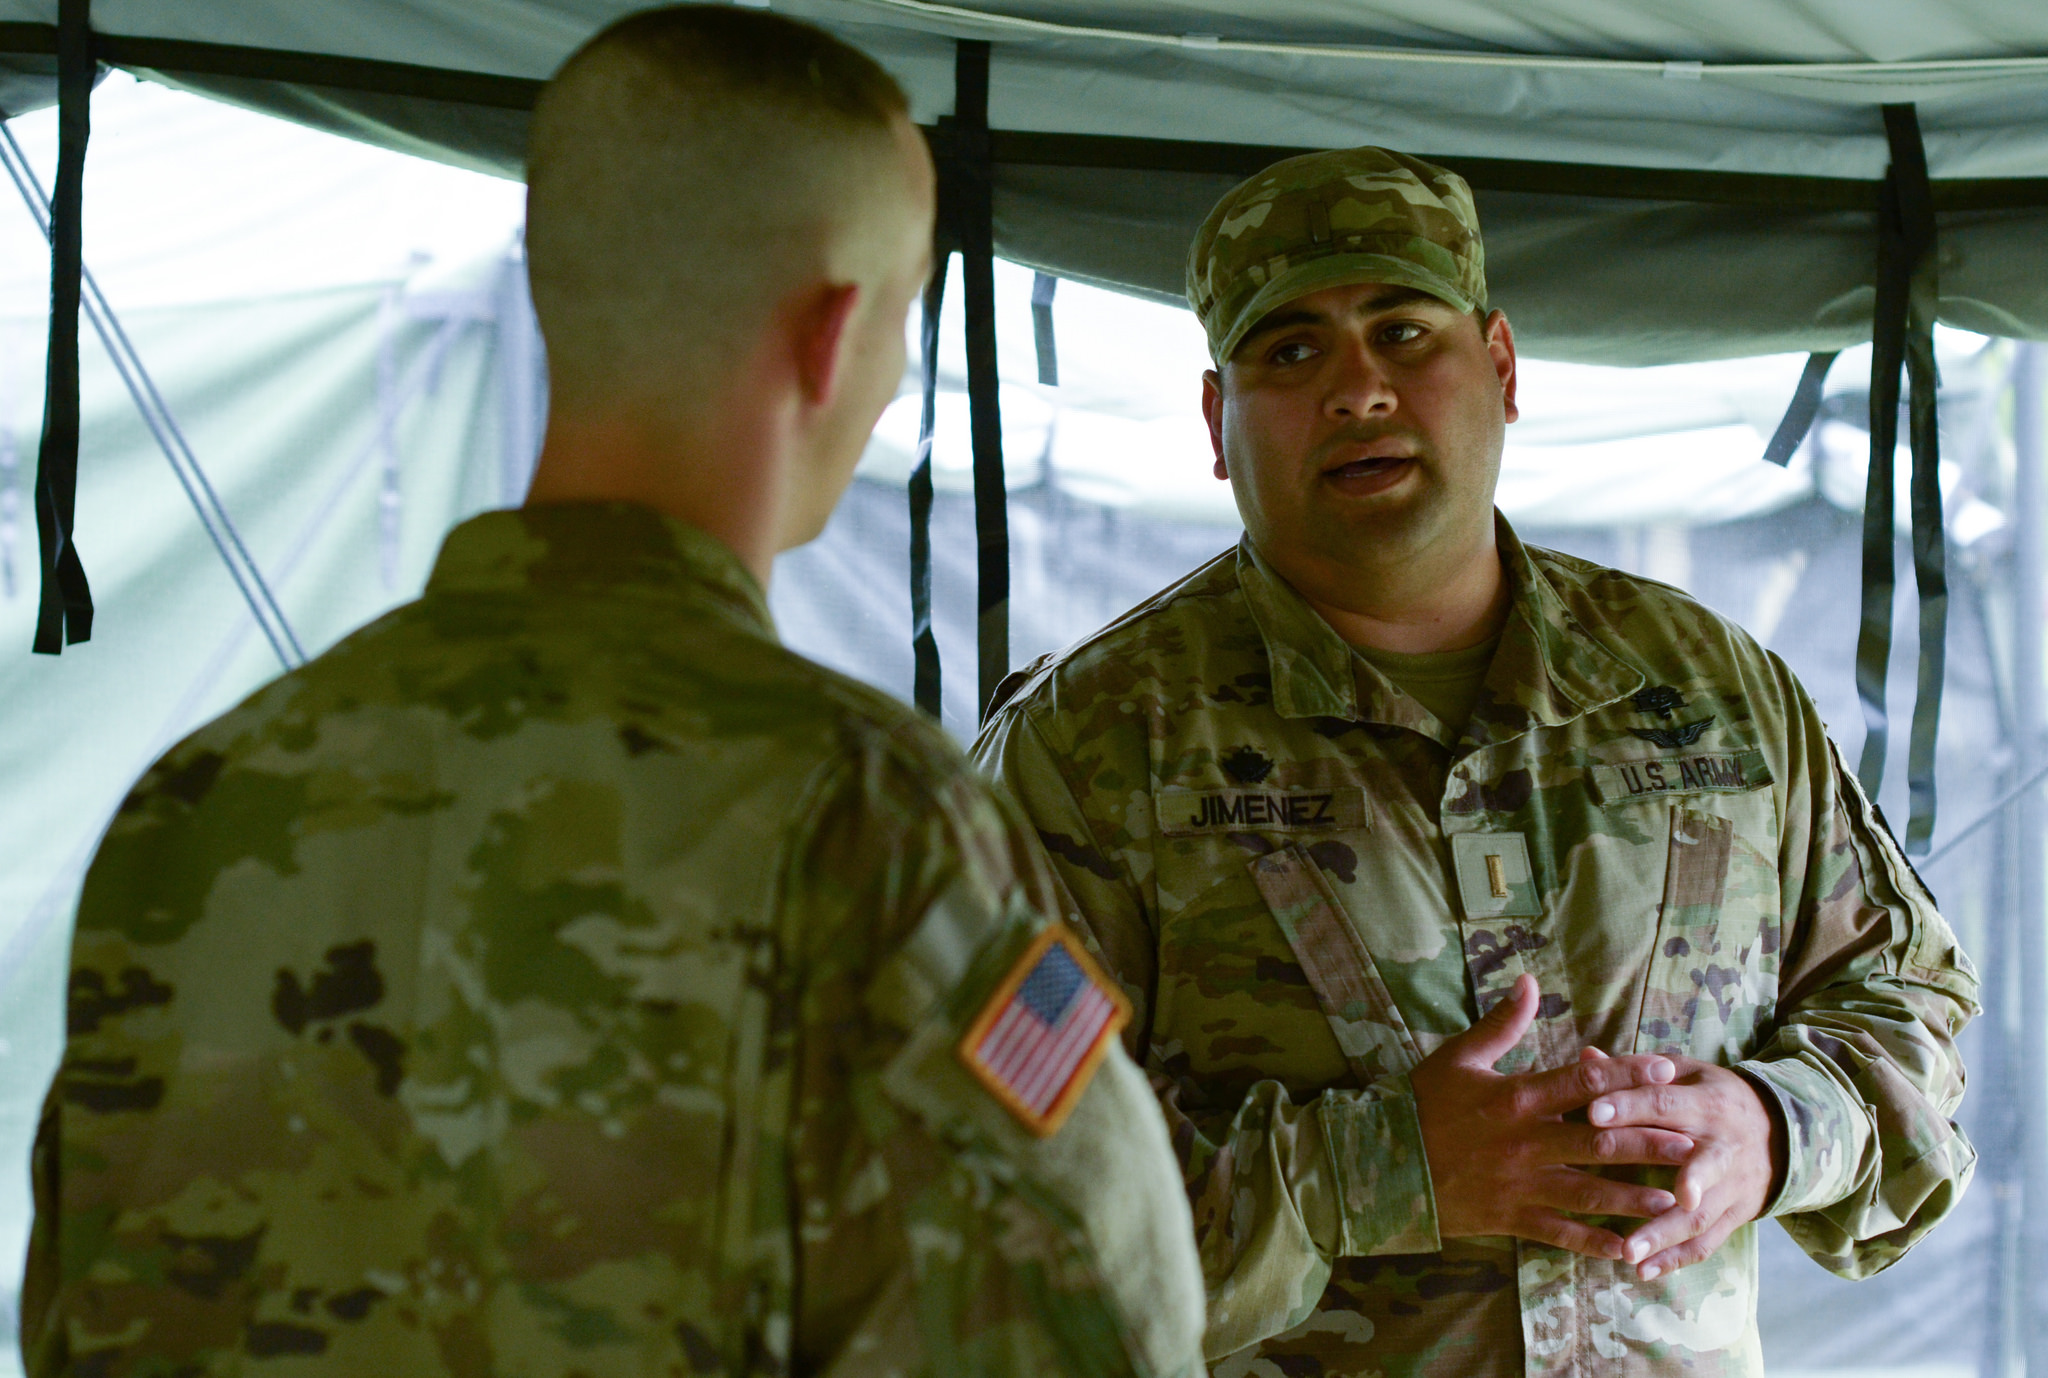 Trainees training trainees: Chaplain Candidates support CST